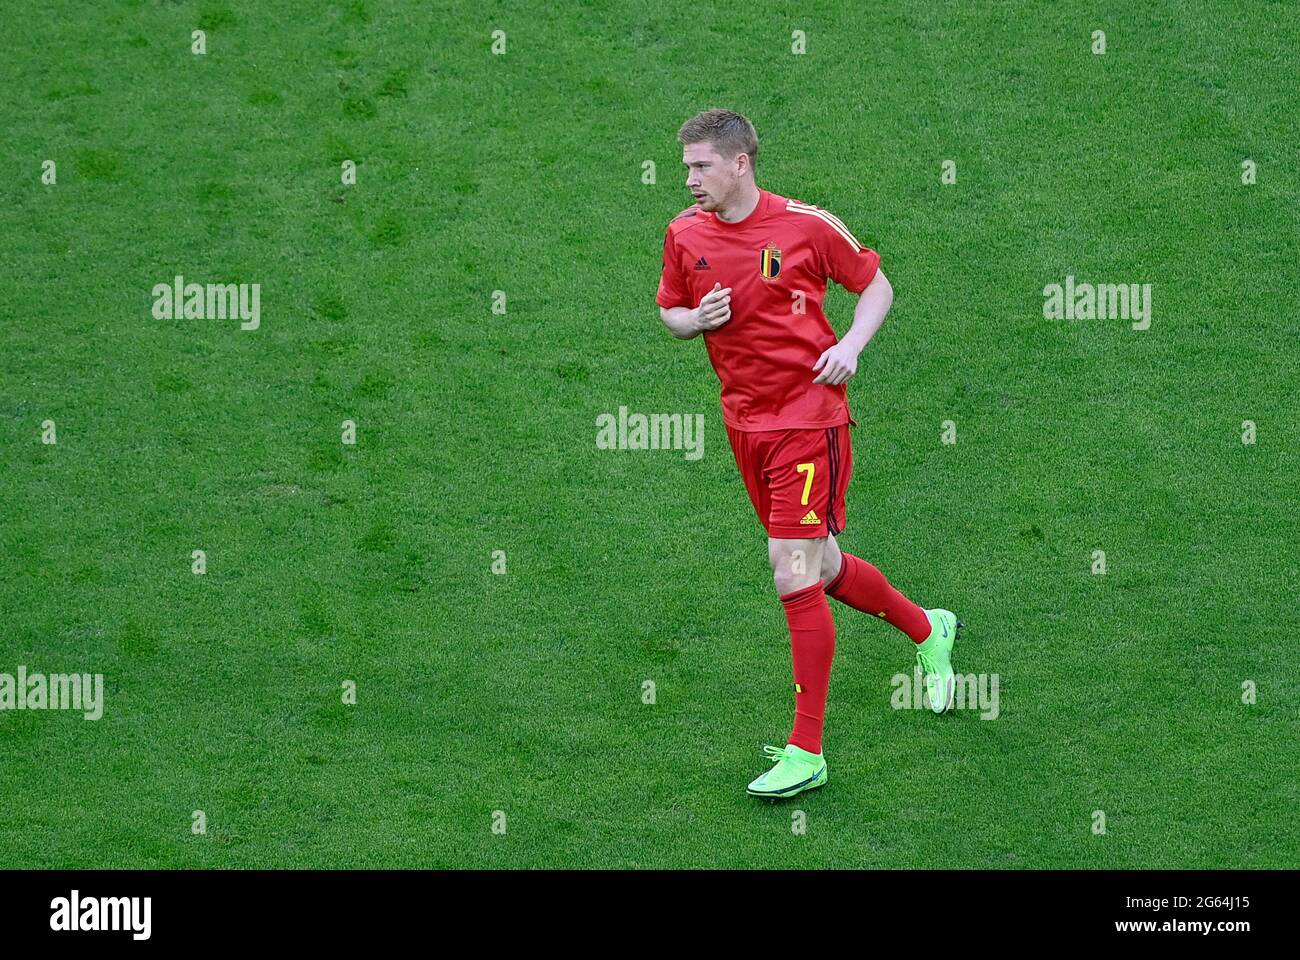 Munchen, Germany. 02nd July, 2021. Belgian midfielder Kevin De Bruyne (7) pictured during warming up of a soccer game during the quarter final Euro 2020 European Championship between the Belgian national soccer team Red Devils and Italy, called the Azzurri, on friday 2 nd of July 2021 in the Allianz Arena in Munchen, Germany . PHOTO SPORTPIX | SPP | DAVID CATRY Credit: SPP Sport Press Photo. /Alamy Live News Stock Photo